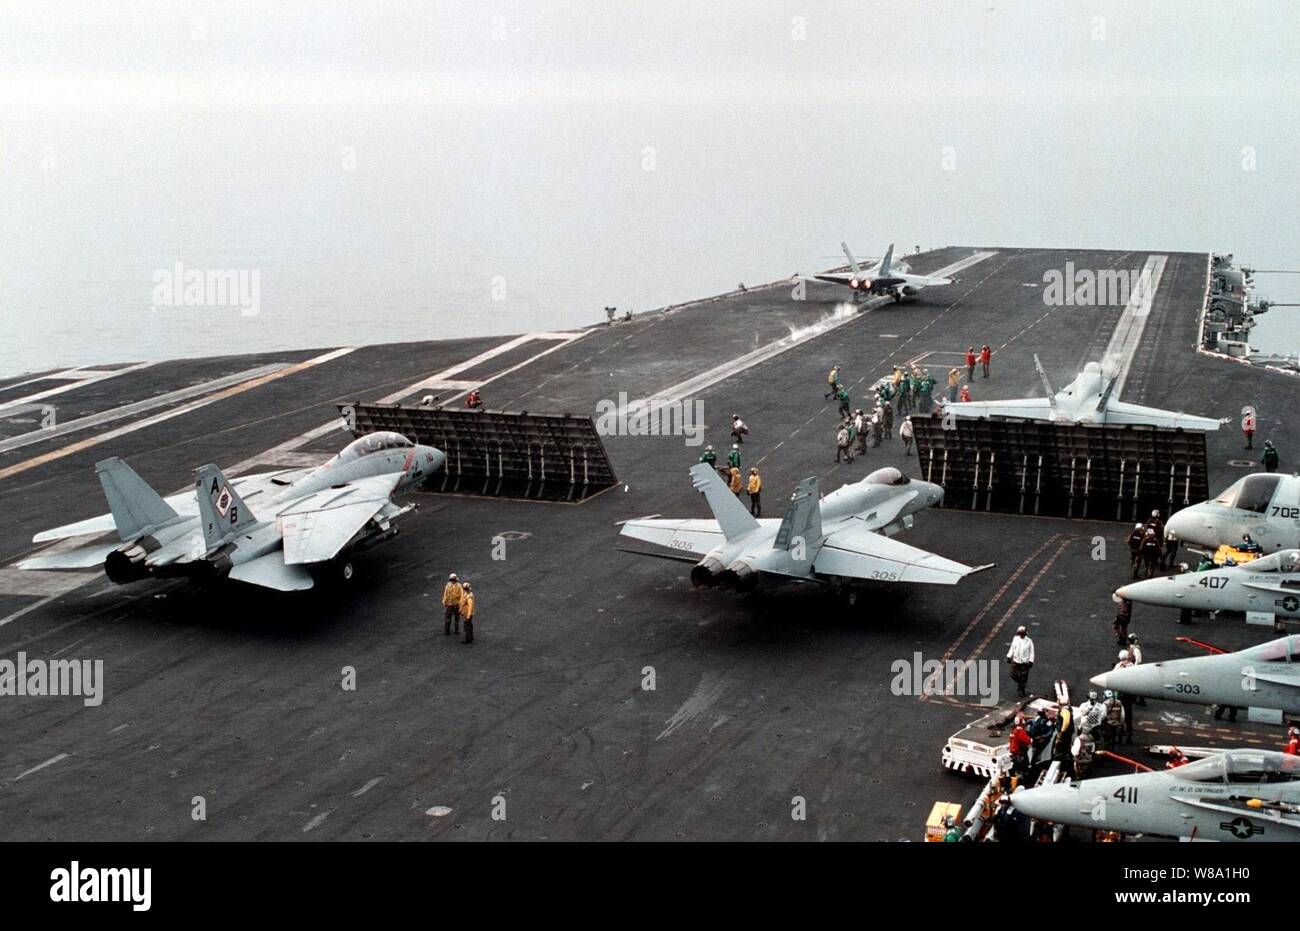 An F/A-18 Hornet hurtles down the No. 2 catapult while an F-14 Tomcat (left) and other Hornets line up for the next launch cycle on the USS George Washington (CVN 73) as the ship steams in the Persian Gulf on Feb. 7, 1998.  The Washington battle group is operating in the Persian Gulf in support of Operation Southern Watch which is the U.S. and coalition enforcement of the no-fly-zone over Southern Iraq. Stock Photo